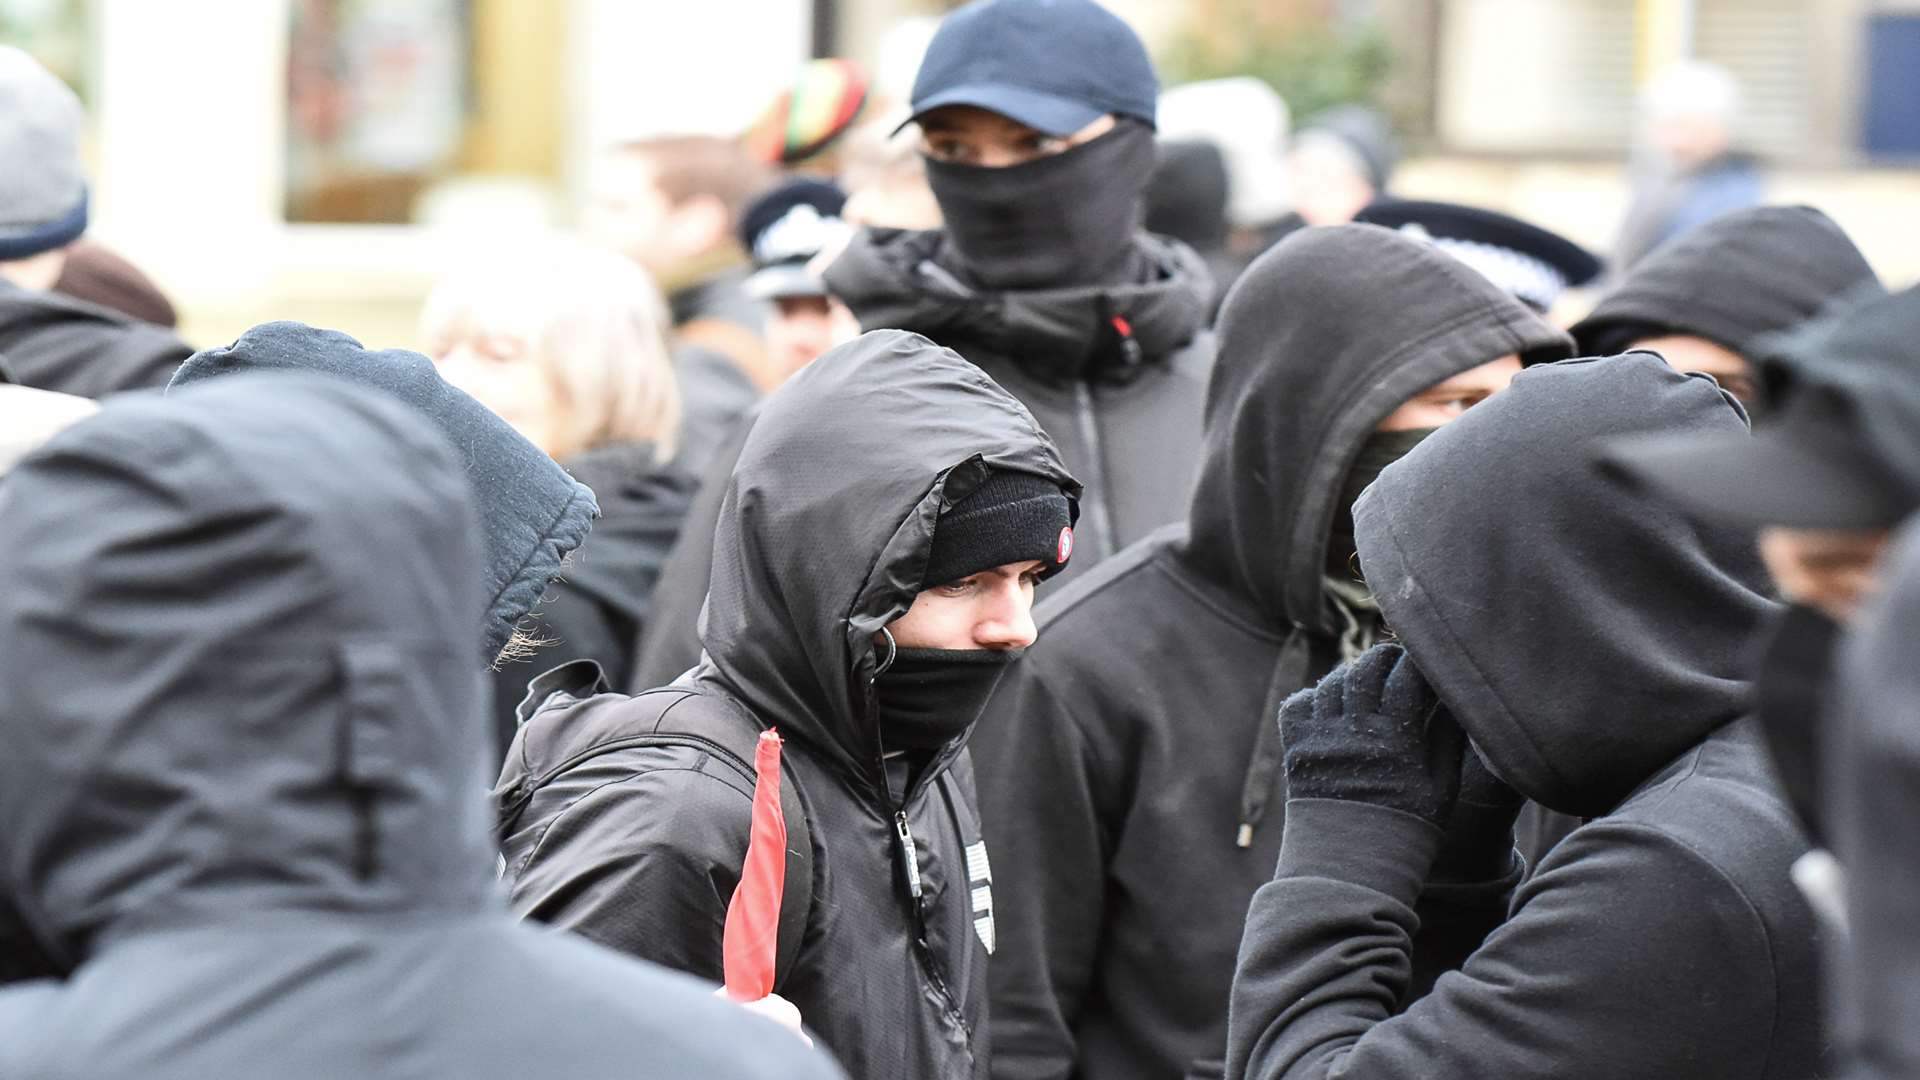 The sinister masked men at the anti-racism rally just before the riots erupted.